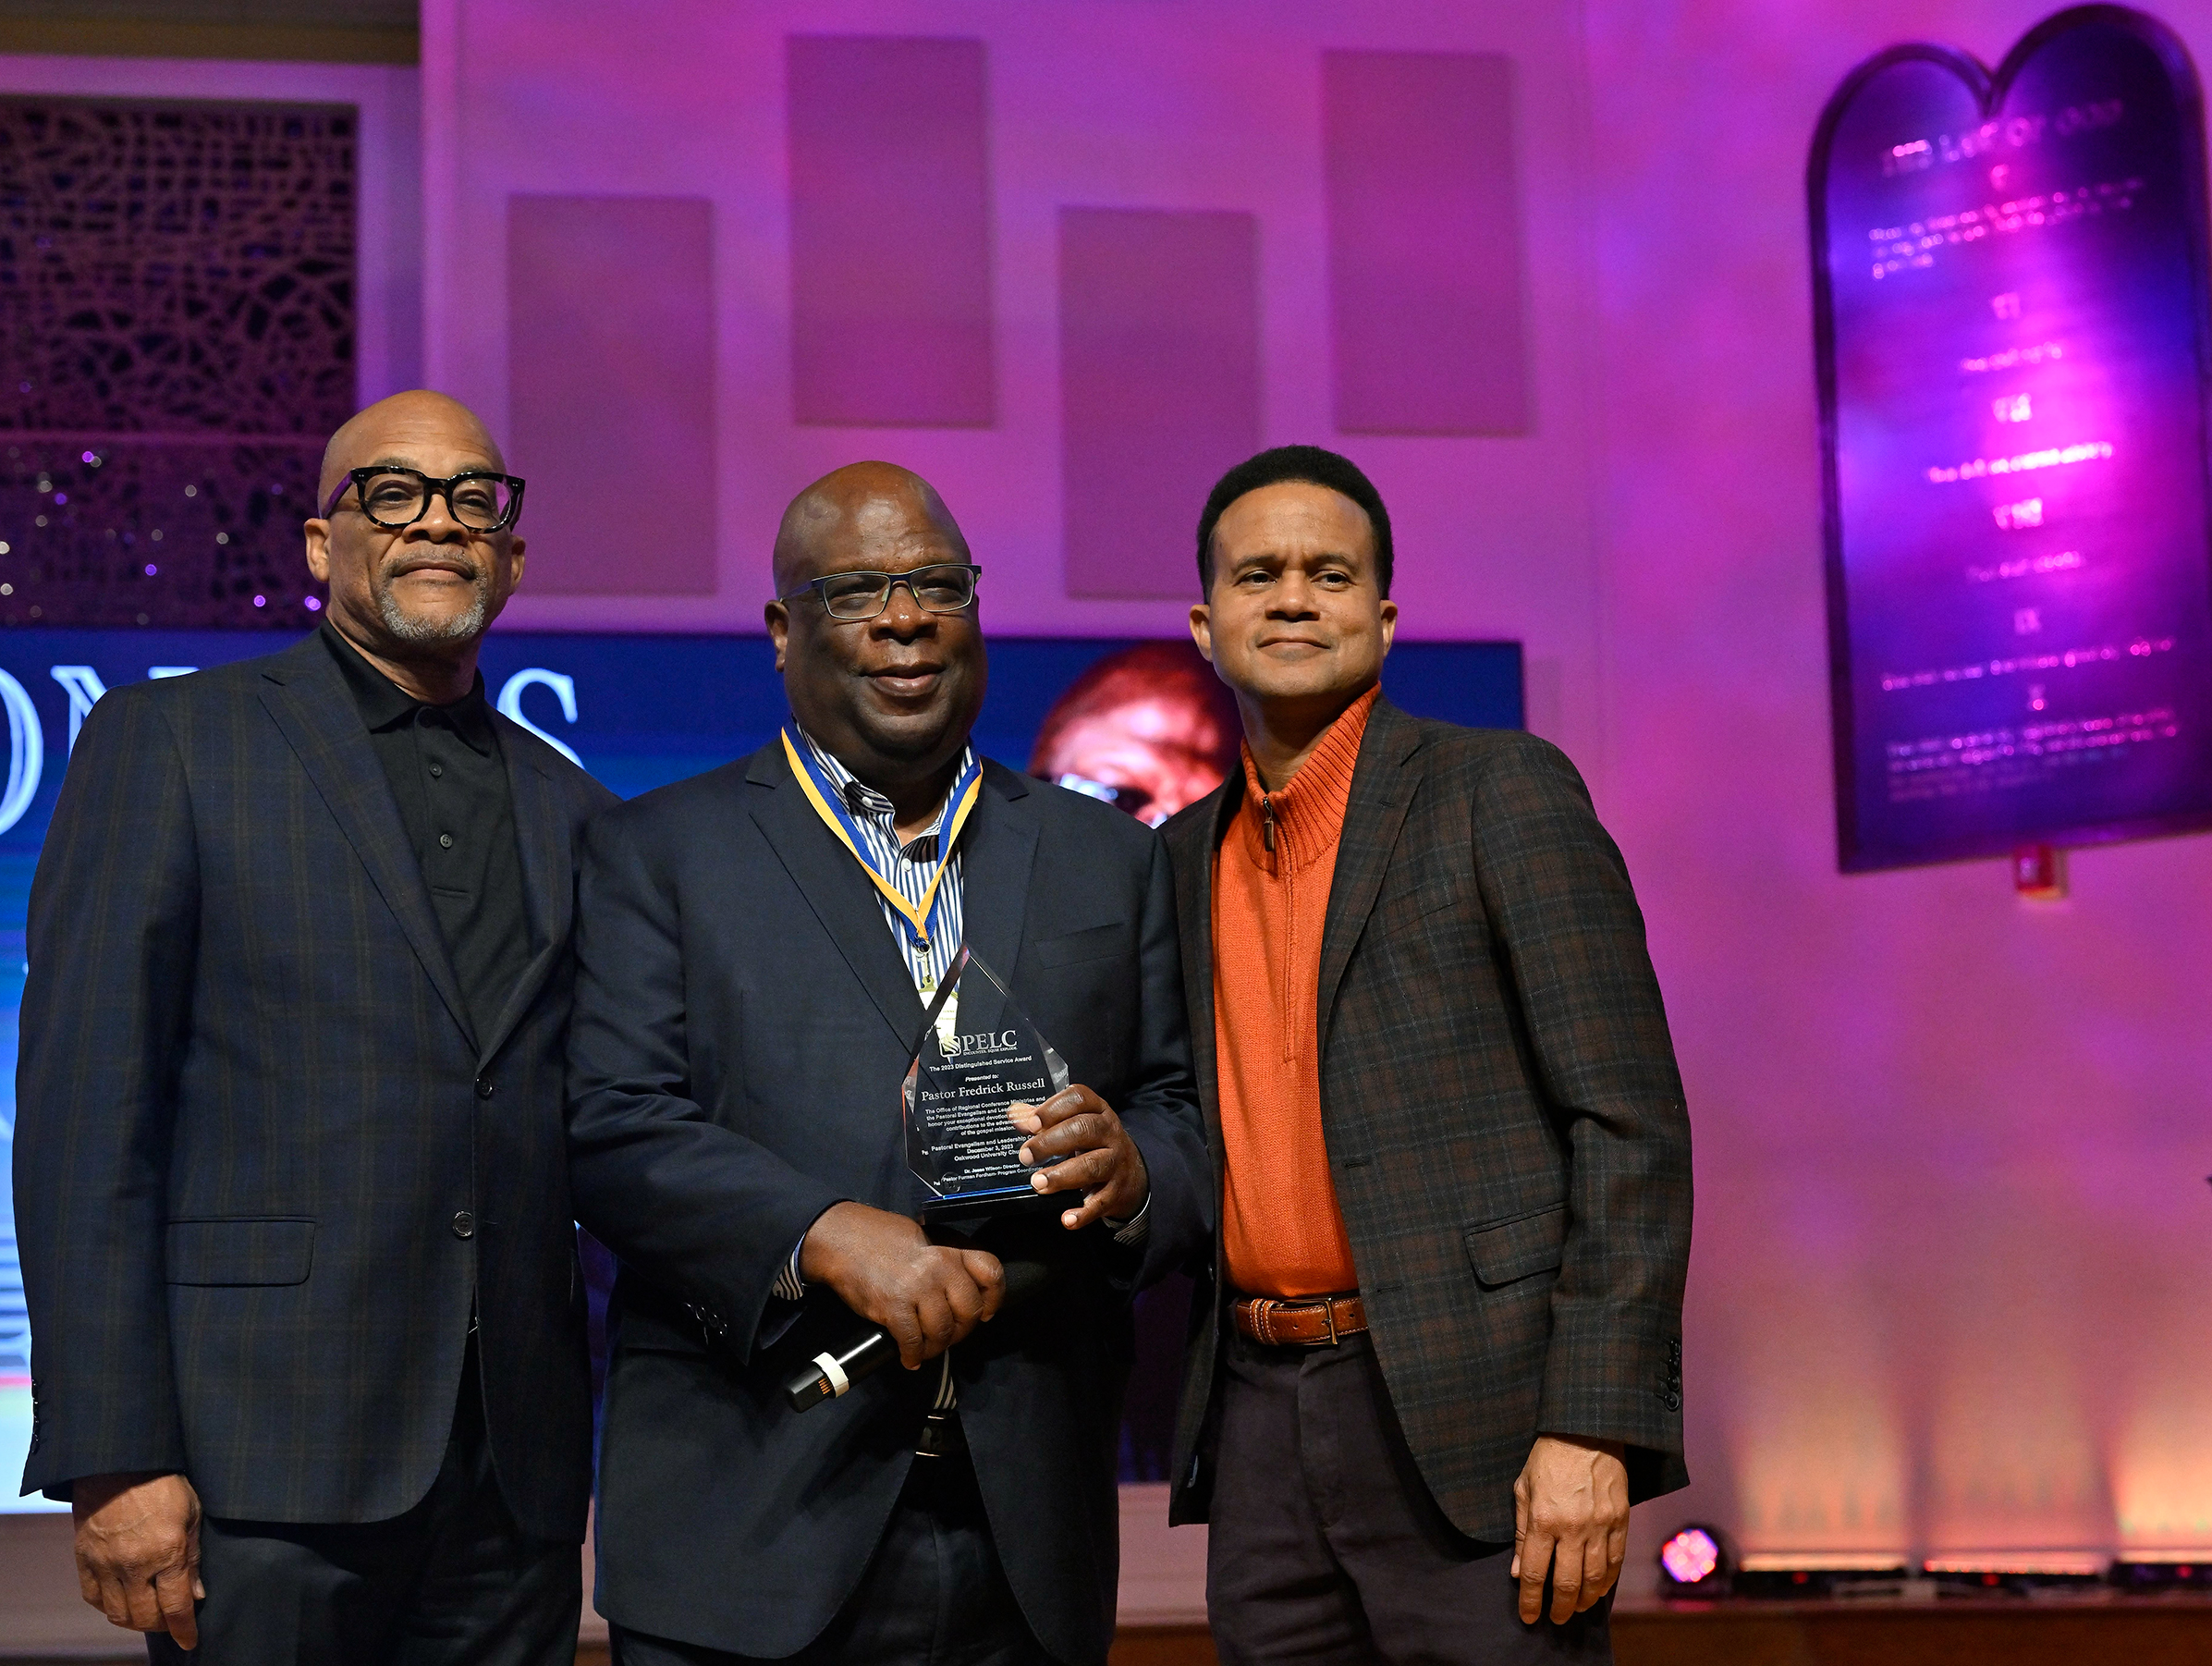 Three Black men on stage in a church. The one in the middle is holding an award.